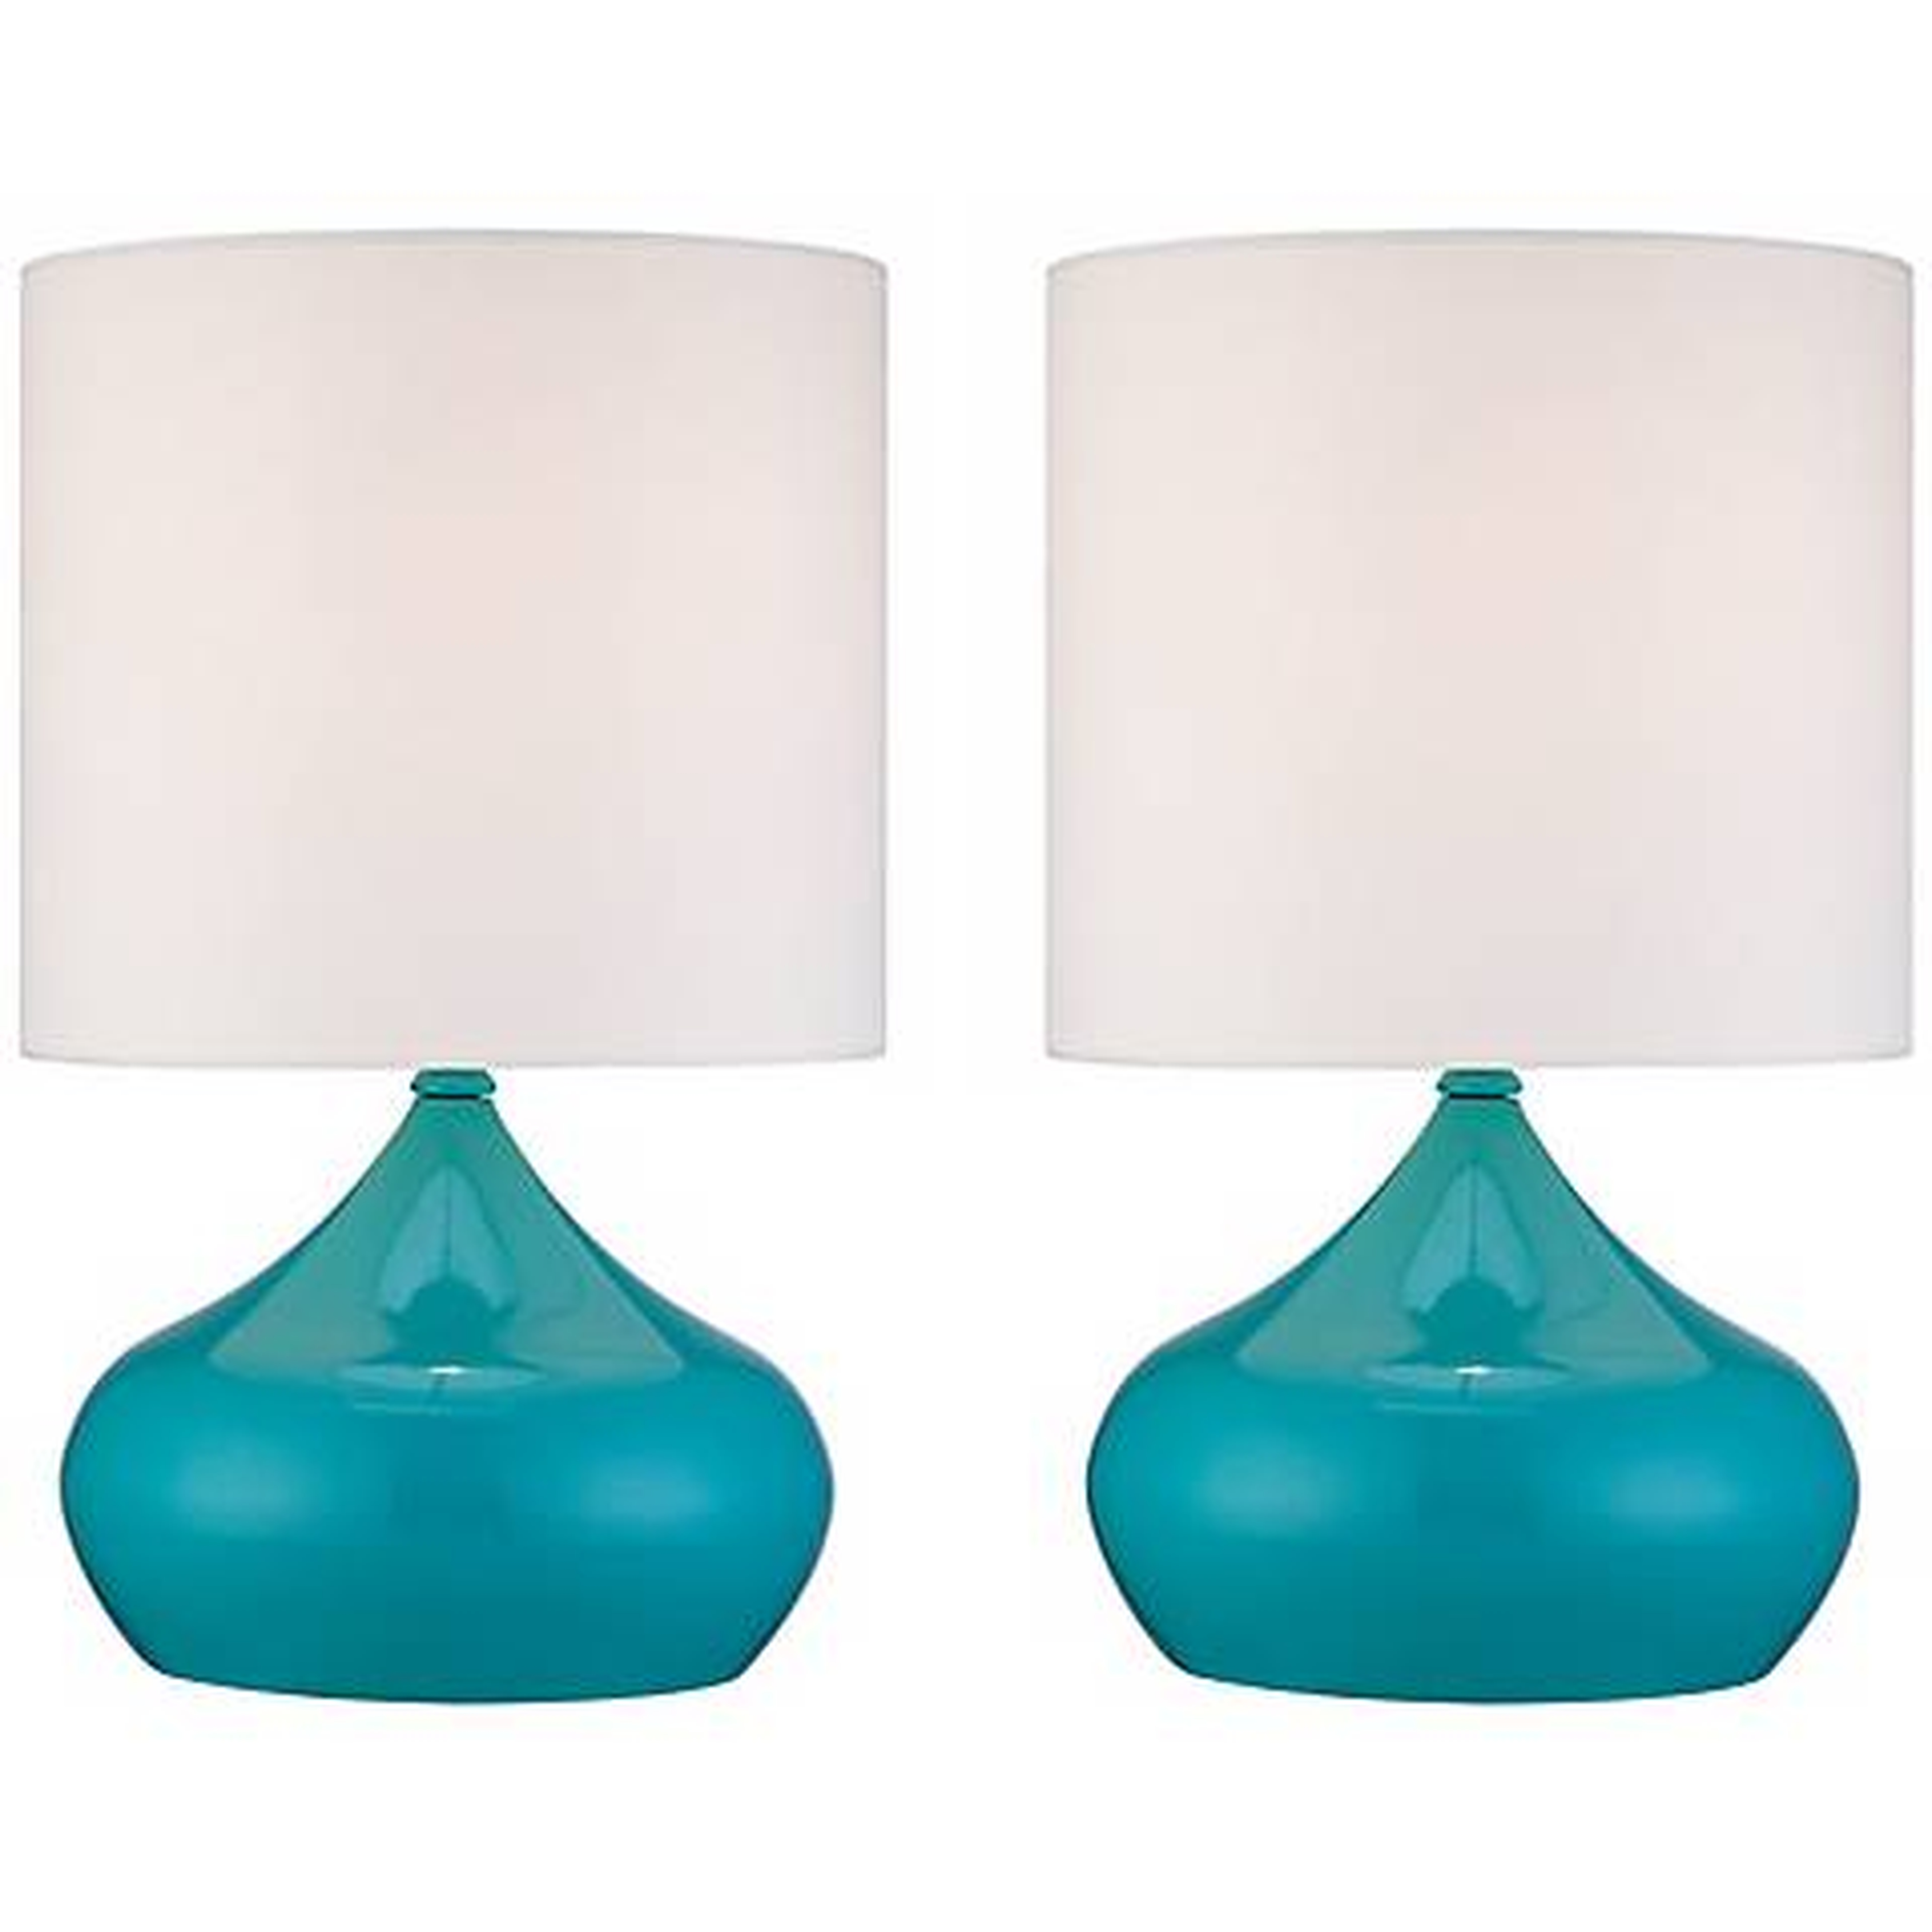 Steel Droplet 14 3/4"H Teal Blue Small Accent Lamps Set of 2 - Lamps Plus